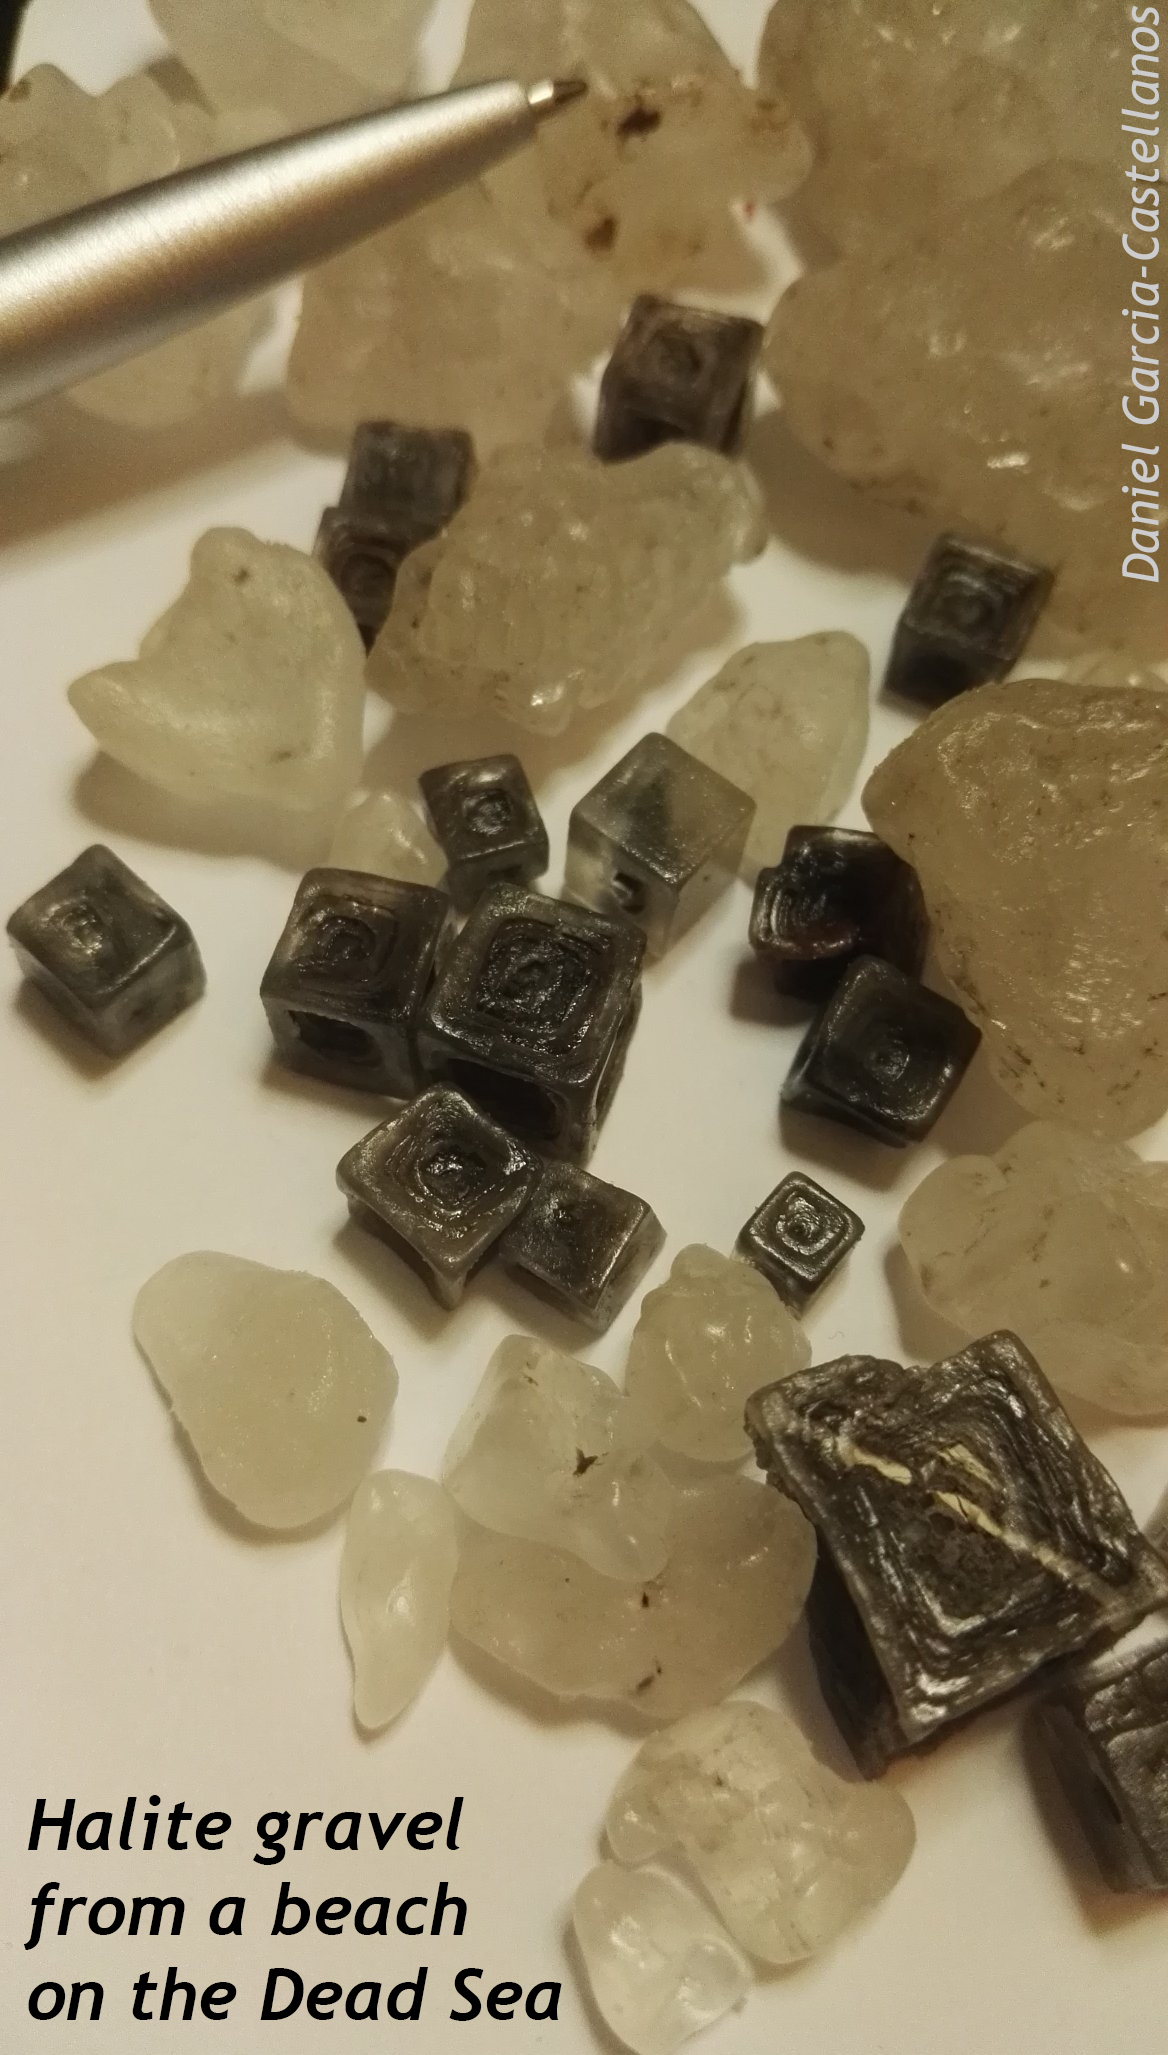 Photograph showing halite gravel from the Dead Sea: a mix of light colored blobby looking bits and very striking dark colored "hopper" cubes. A pen serves as a sense of scale.